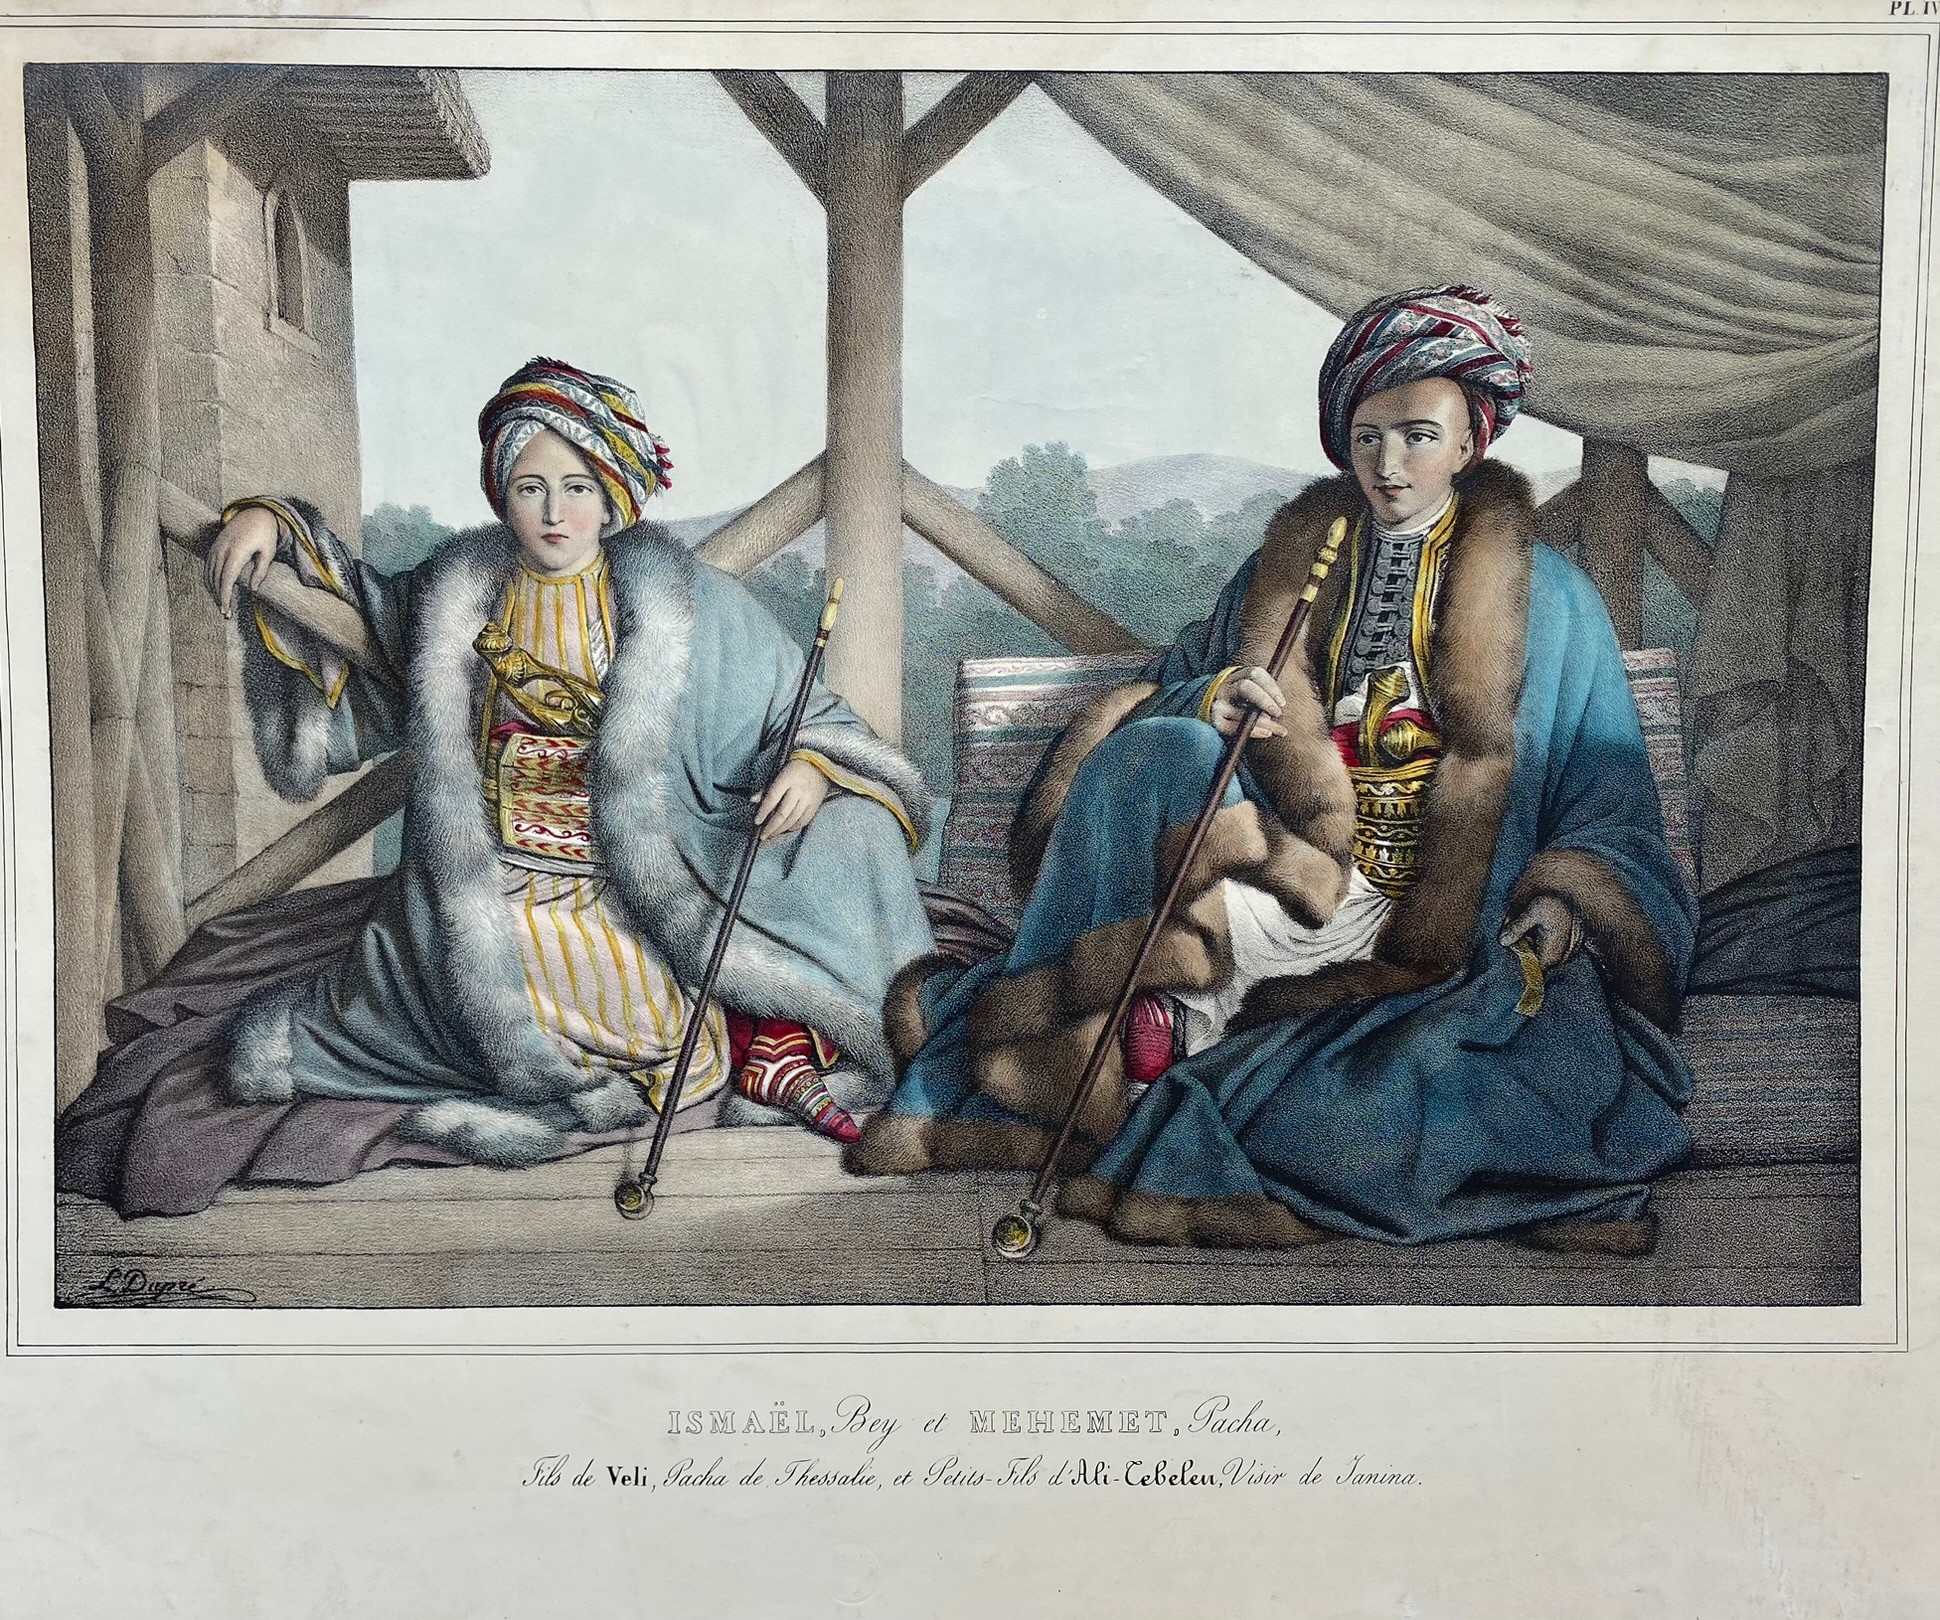 Louis Dupre (1789-1837), Original lithograph hand coloured with watercolour, Titled Ismael, Bey et - Image 2 of 6